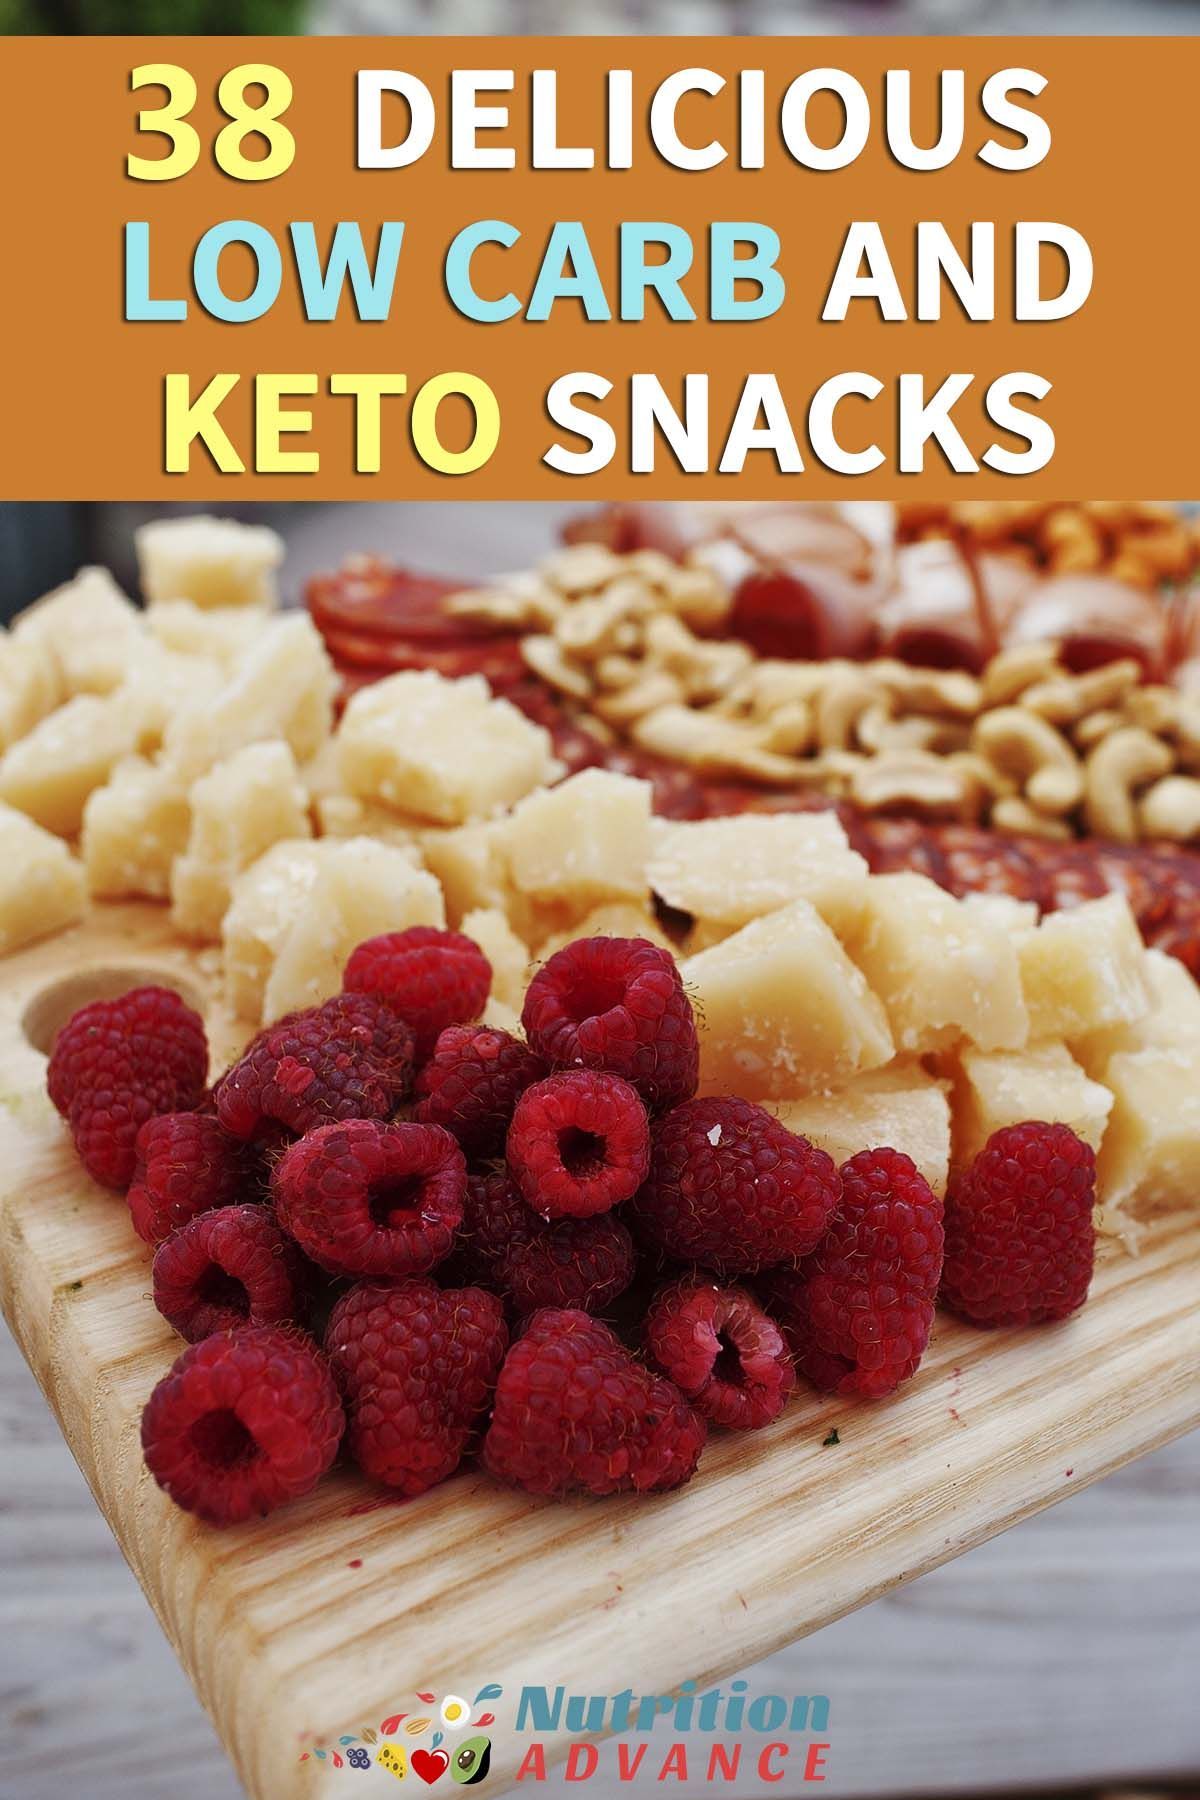 38 Delicious Low Carb and Keto Snacks – Looking for inspiration? Then here’s a list of 38 delicious keto snacks, recipes, foods,